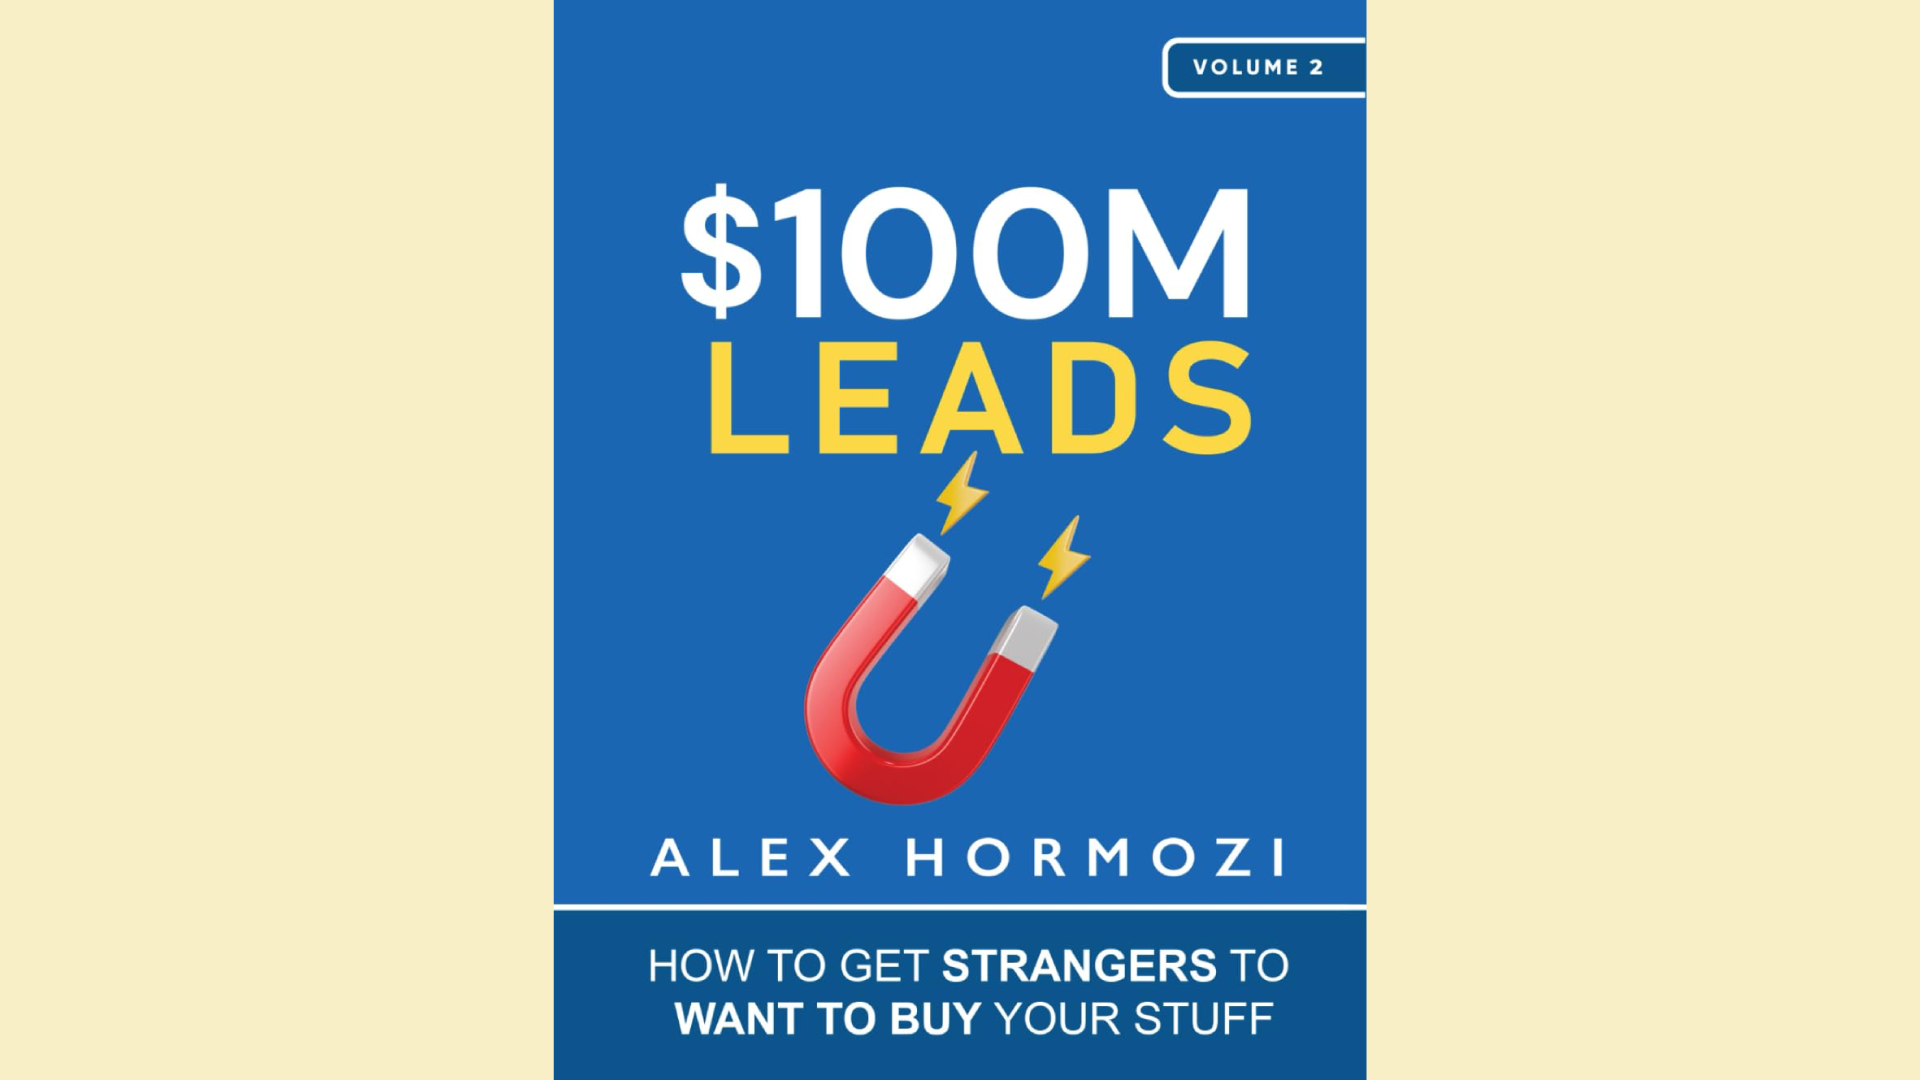 Summary: $100M Leads by Alex Hormozi